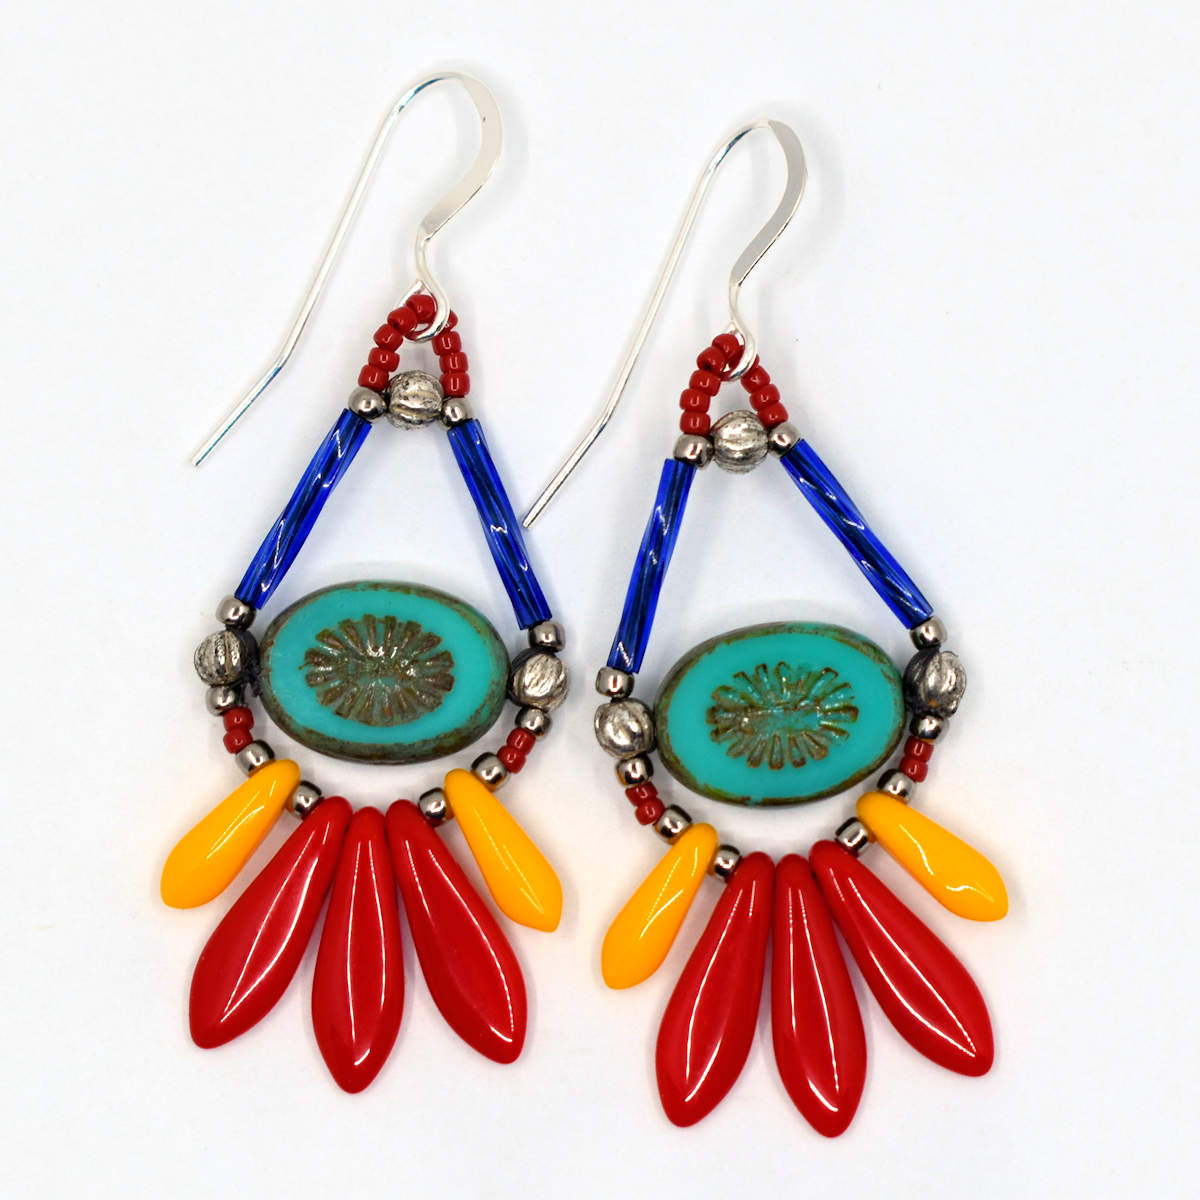 Bright teardrop shaped earrings with silver earwires lay on a white background. The earrings' teardrop shape is formed by blue tube beads at the top and turquoise oval beads with an embossed starburst in the middle. At the bottom is a long fringe of dagger beads, with three larger red ones in the middle and smaller light orange ones framing them. 